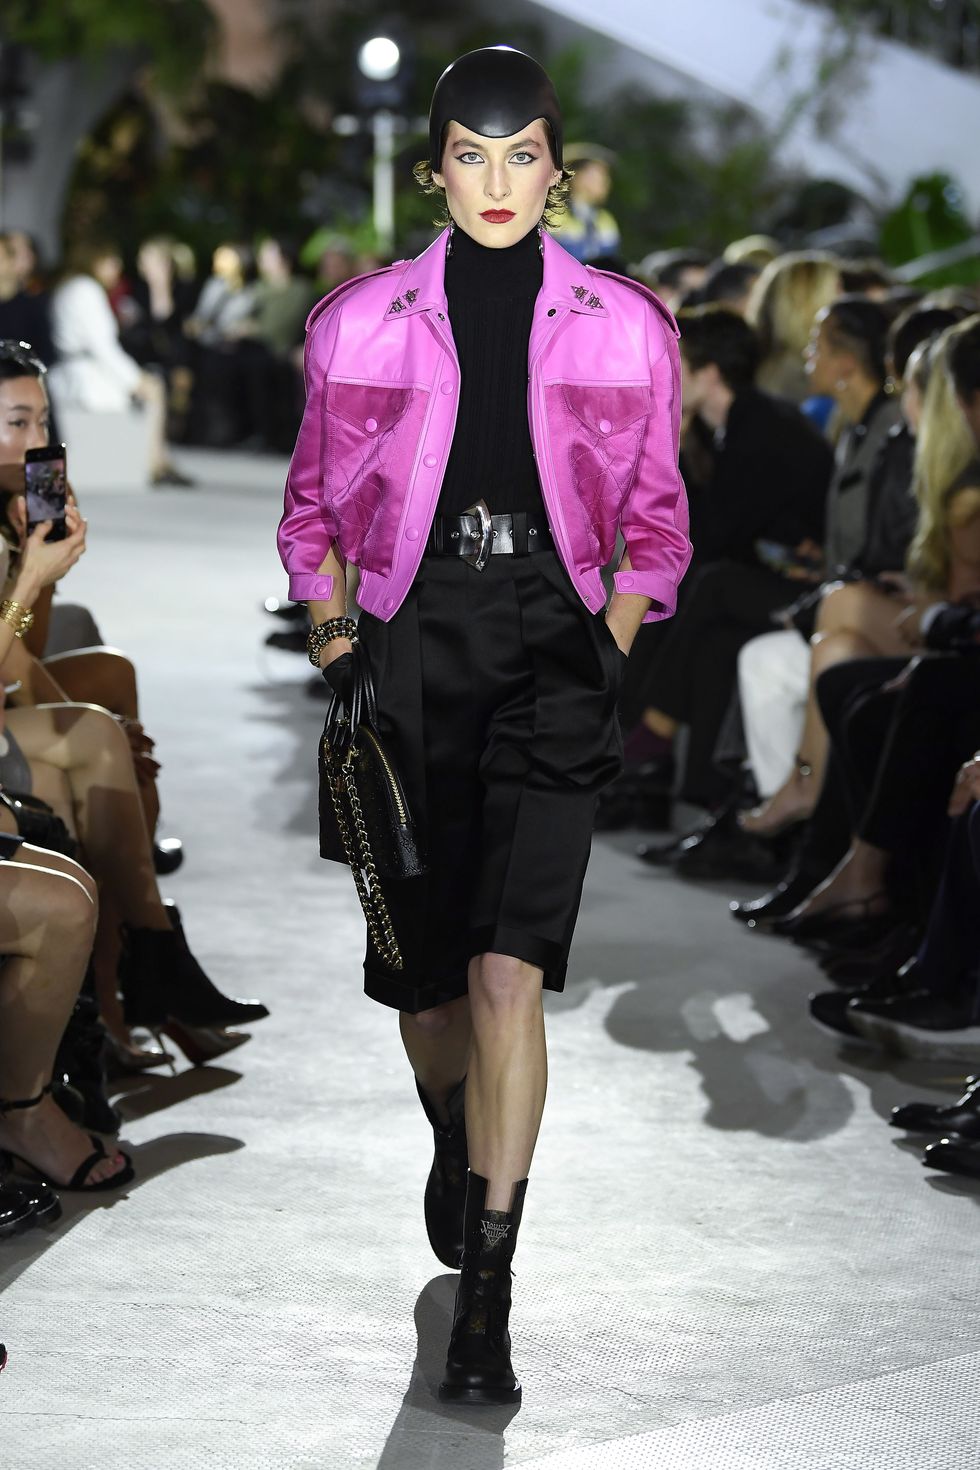 Louis Vuitton Showcases OLED Screen Bags at Cruise 2020 Runway